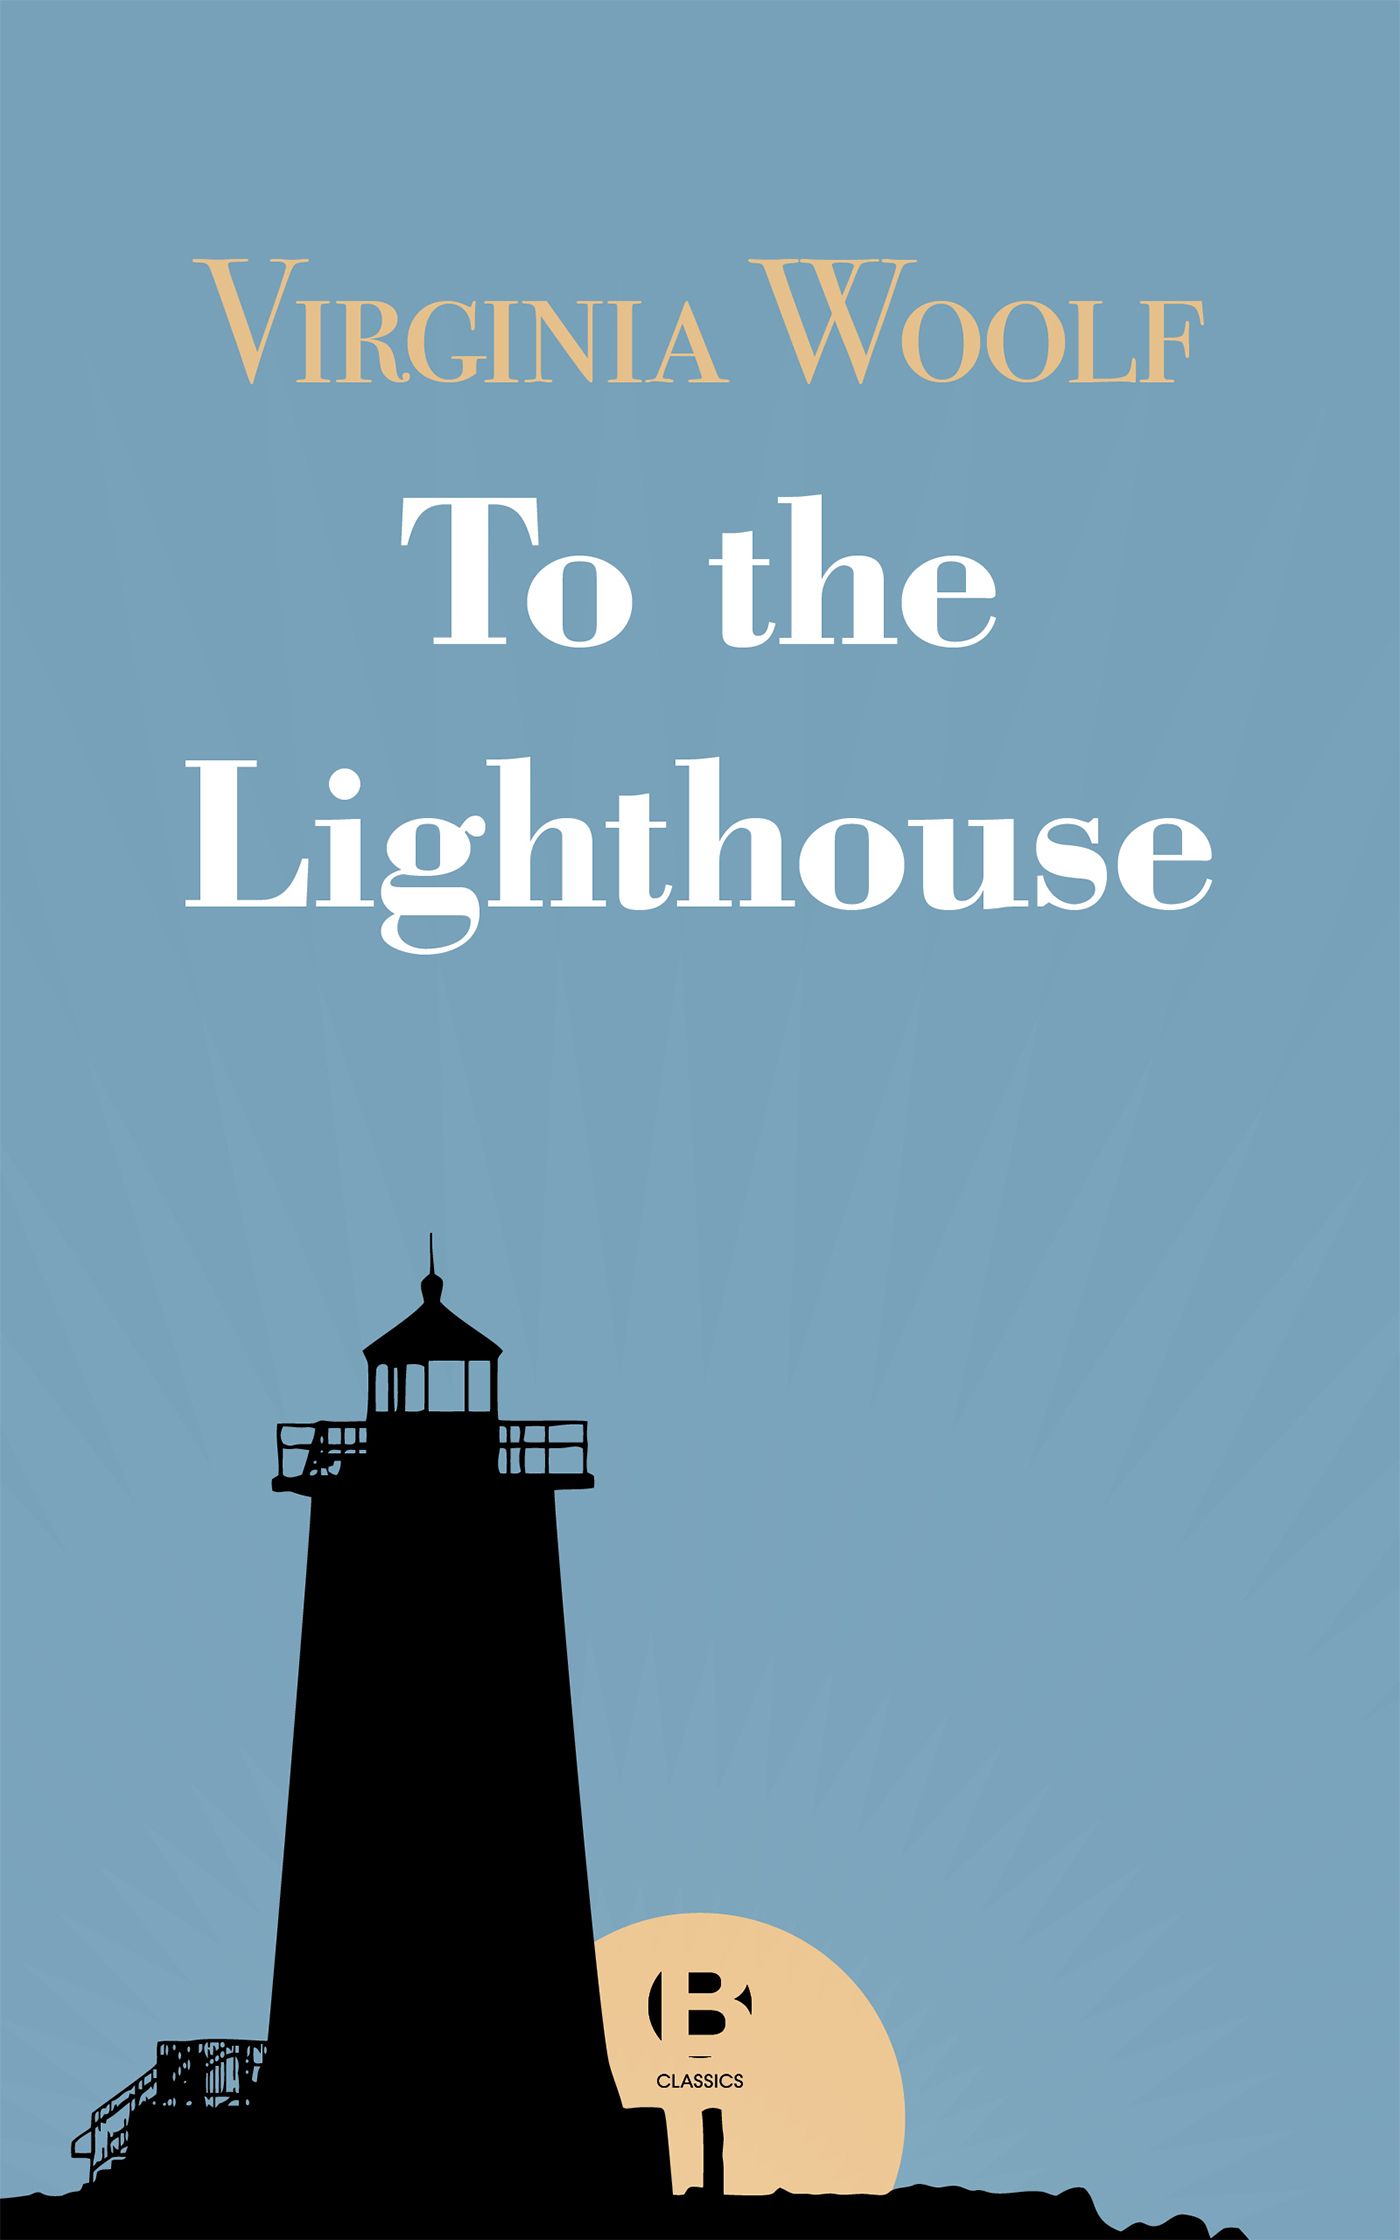 To the Lighthouse, eBook by Virginia Woolf